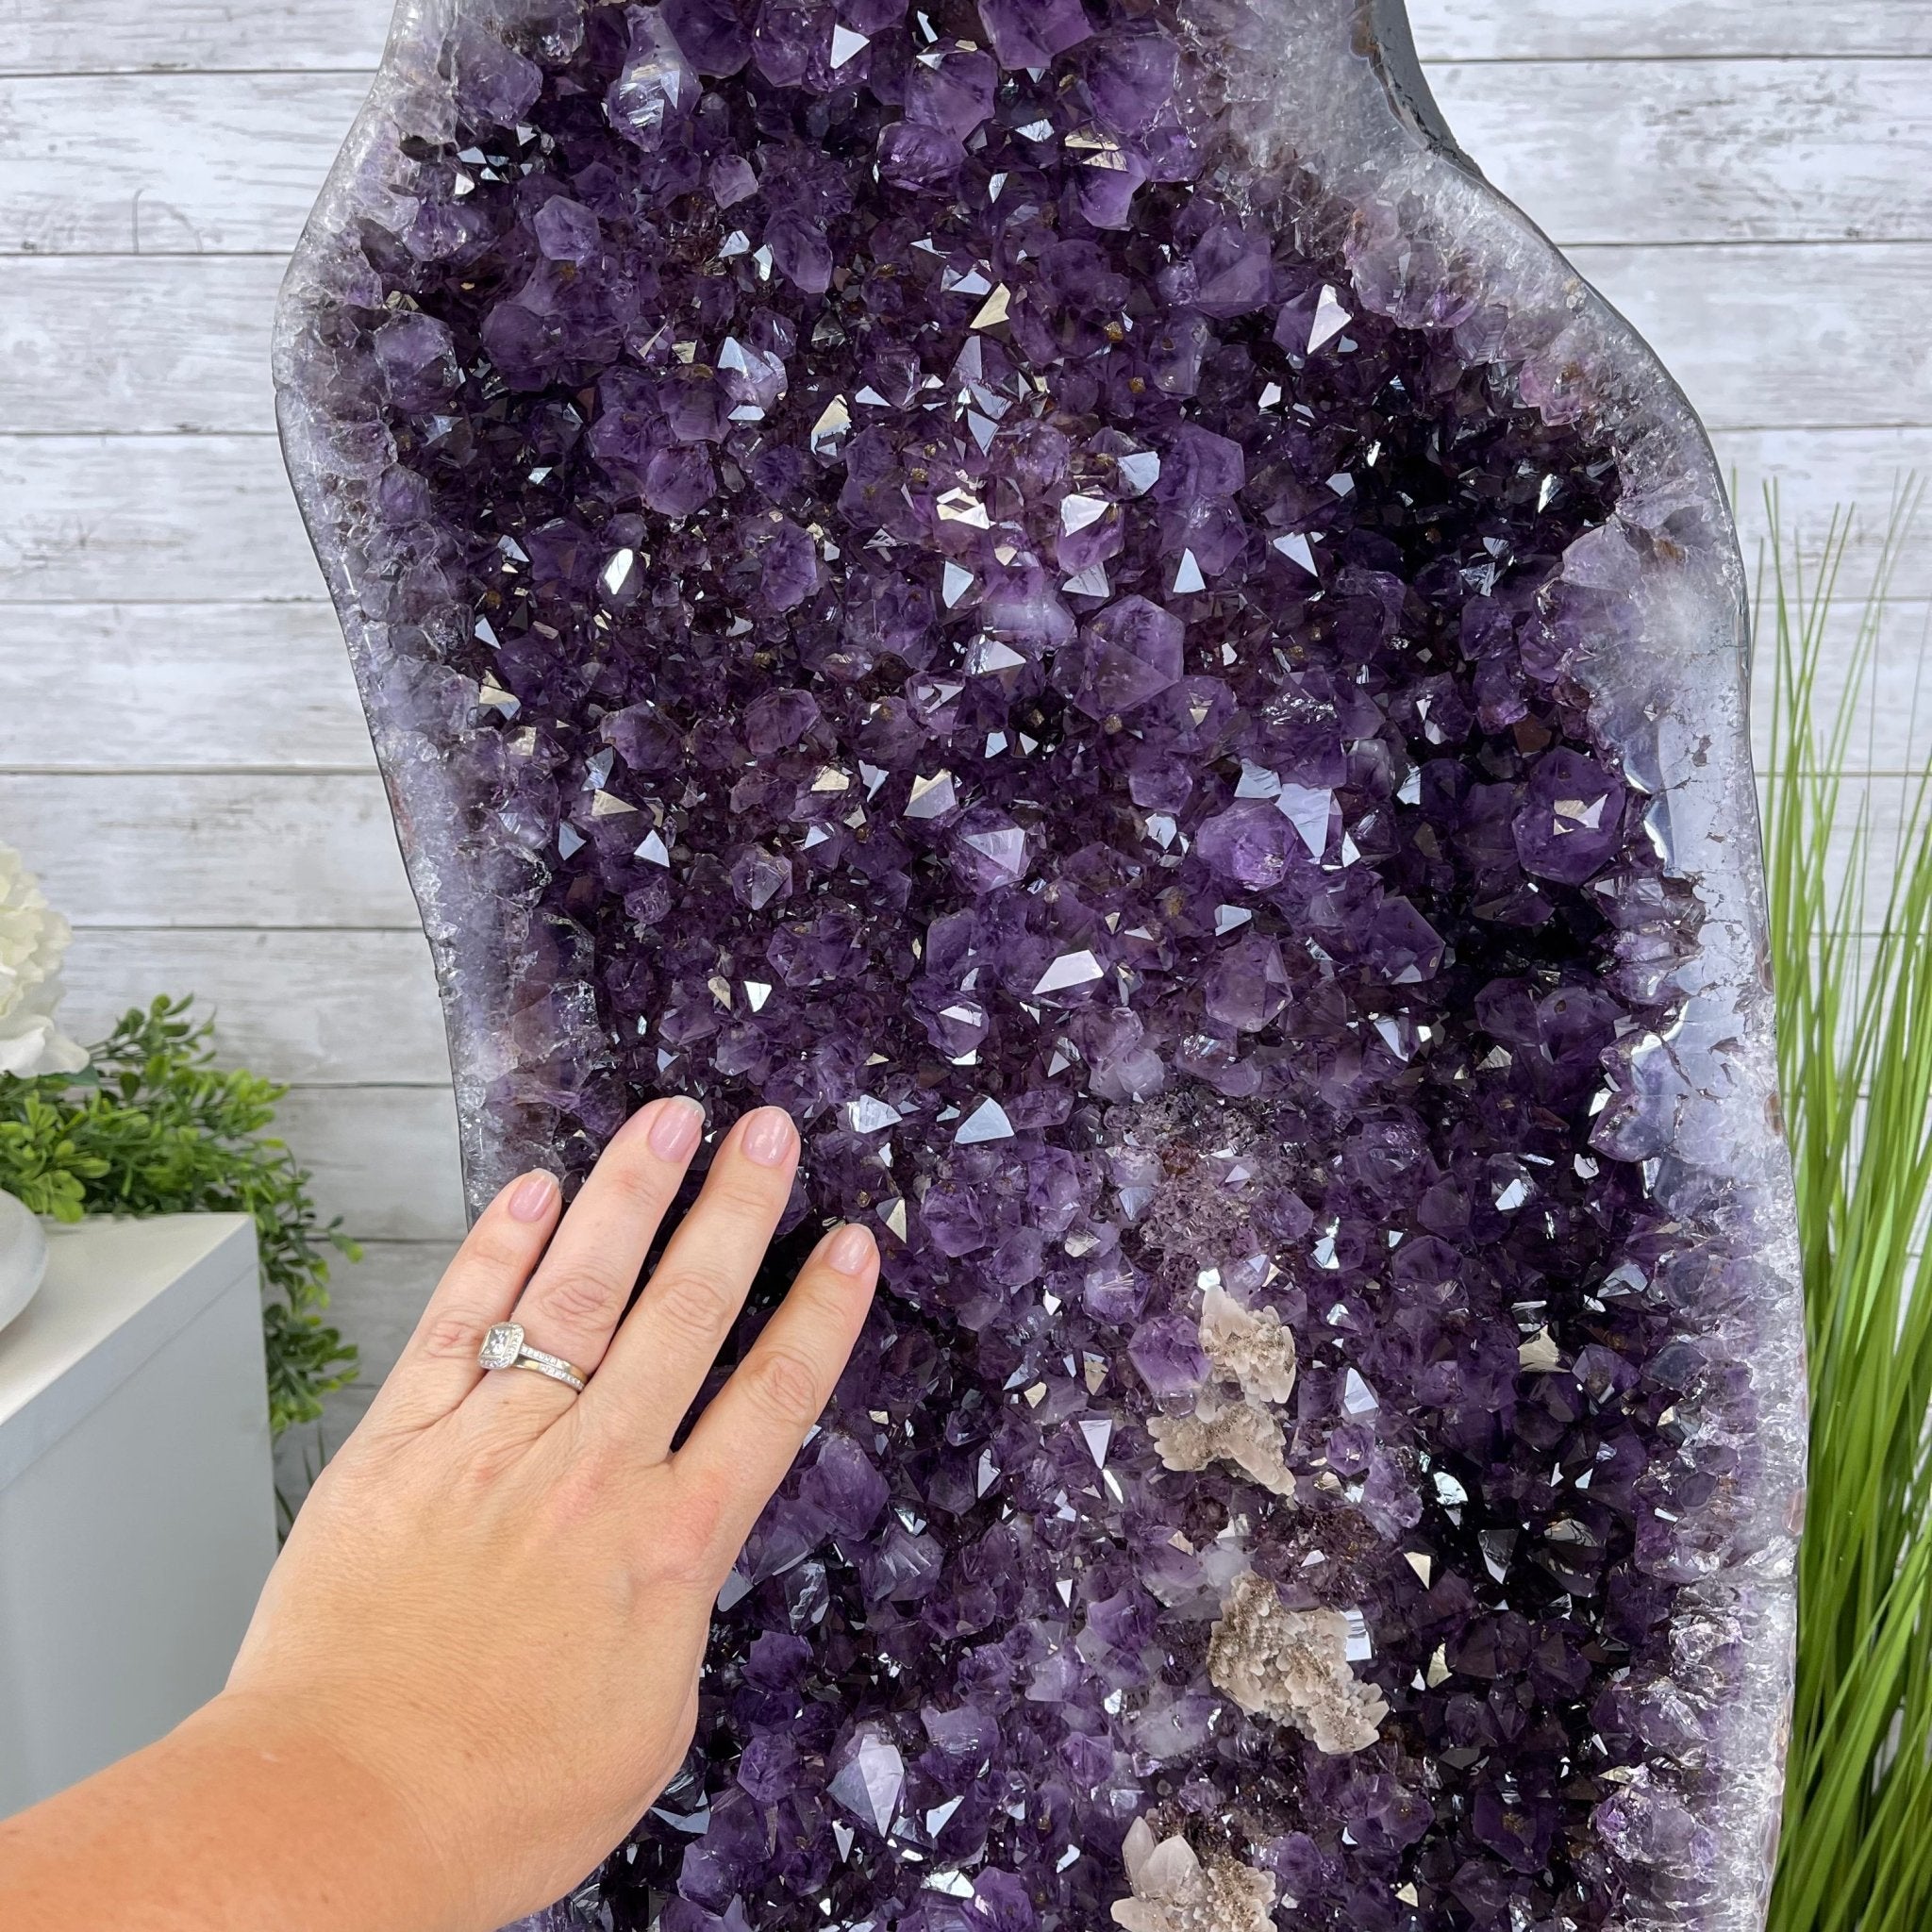 Large Super Quality Brazilian Amethyst Cathedral, 55" Tall & 326.3 lbs, Model #5601-0891 by Brazil Gems - Brazil GemsBrazil GemsLarge Super Quality Brazilian Amethyst Cathedral, 55" Tall & 326.3 lbs, Model #5601-0891 by Brazil GemsCathedrals5601-0891